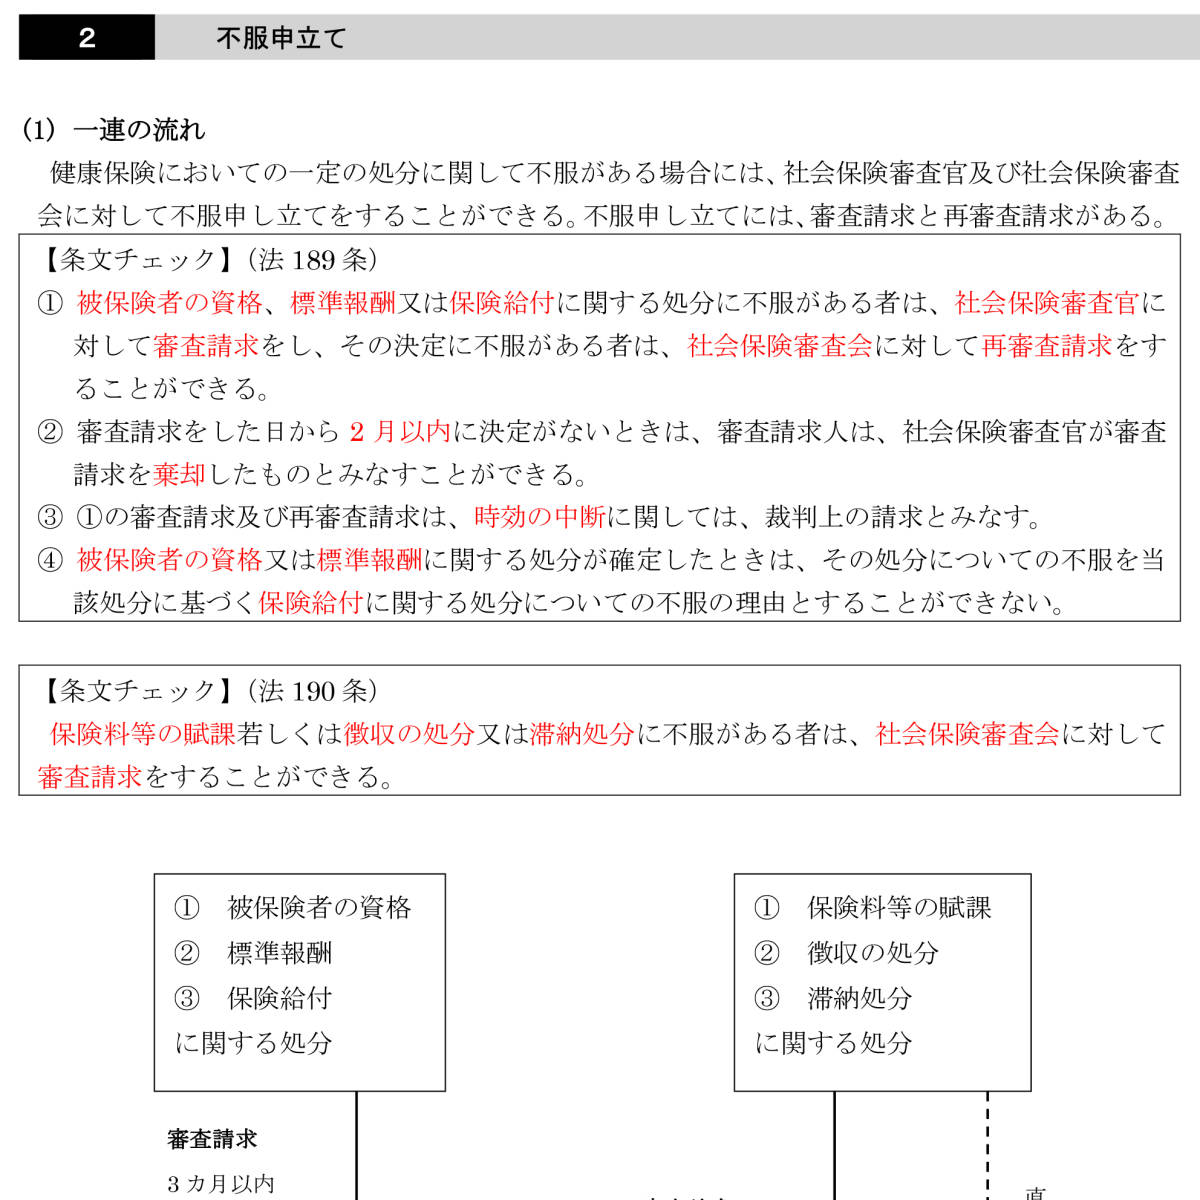  regular price approximately 8 ten thousand jpy!2023 licensed social insurance consultant ( Labor and Social Security Attorney ) examination DVD course 37 pieces set * new goods * lack of none * text attaching (PDF)* tuck .rek... low price 